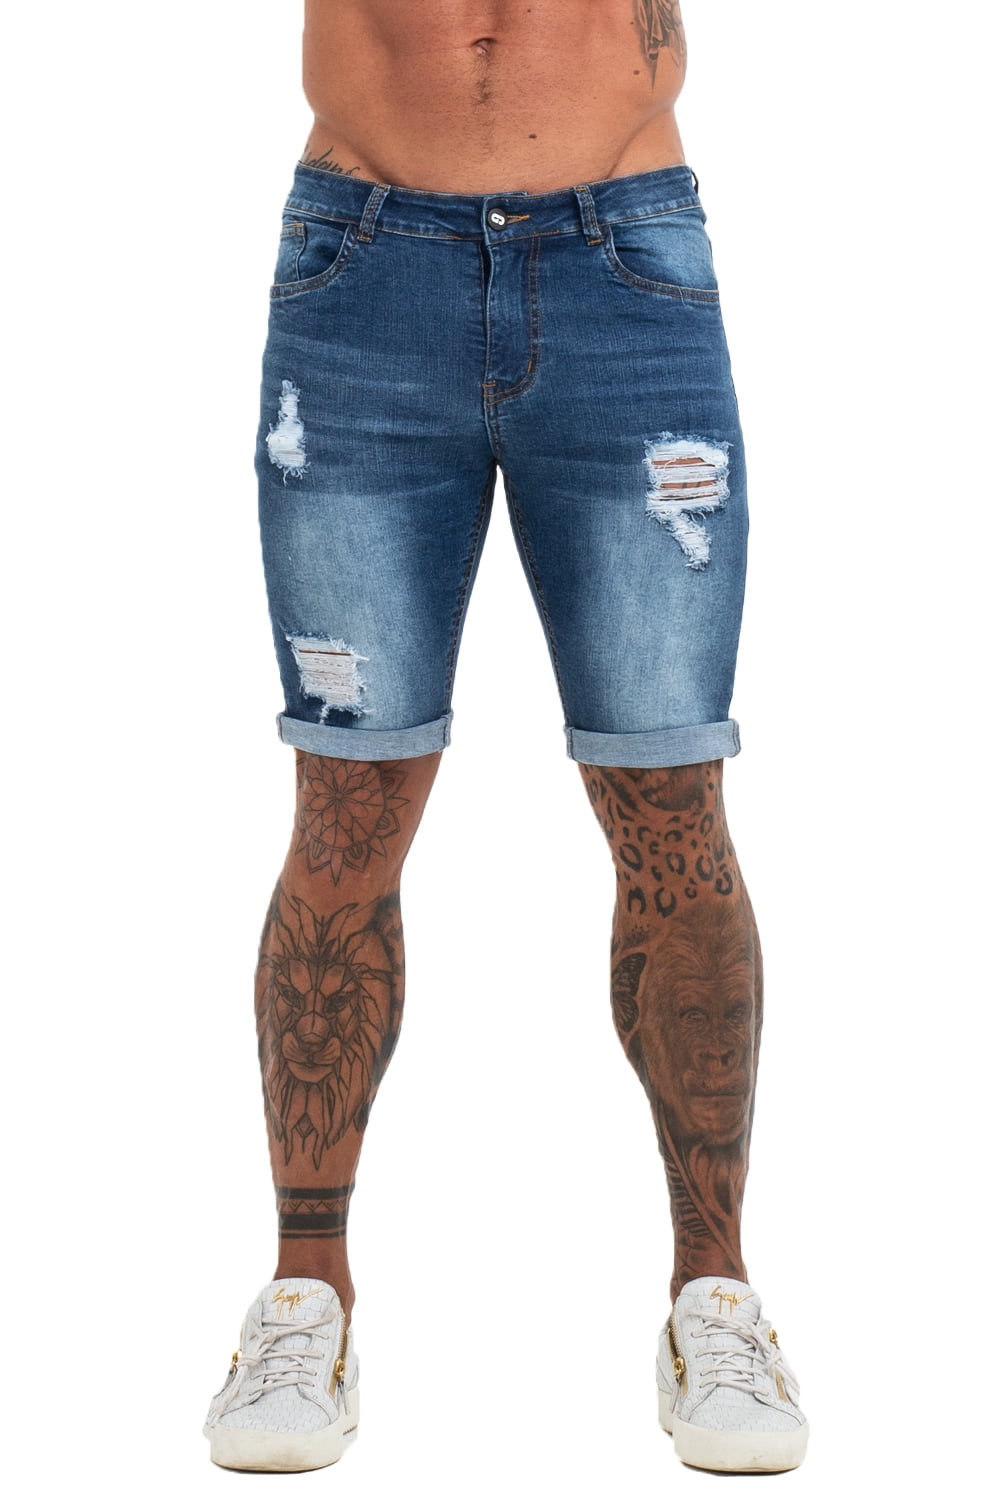 GINGTTO Men's Fashion Ripped Short Jeans Casual Denim Shorts with Hole 